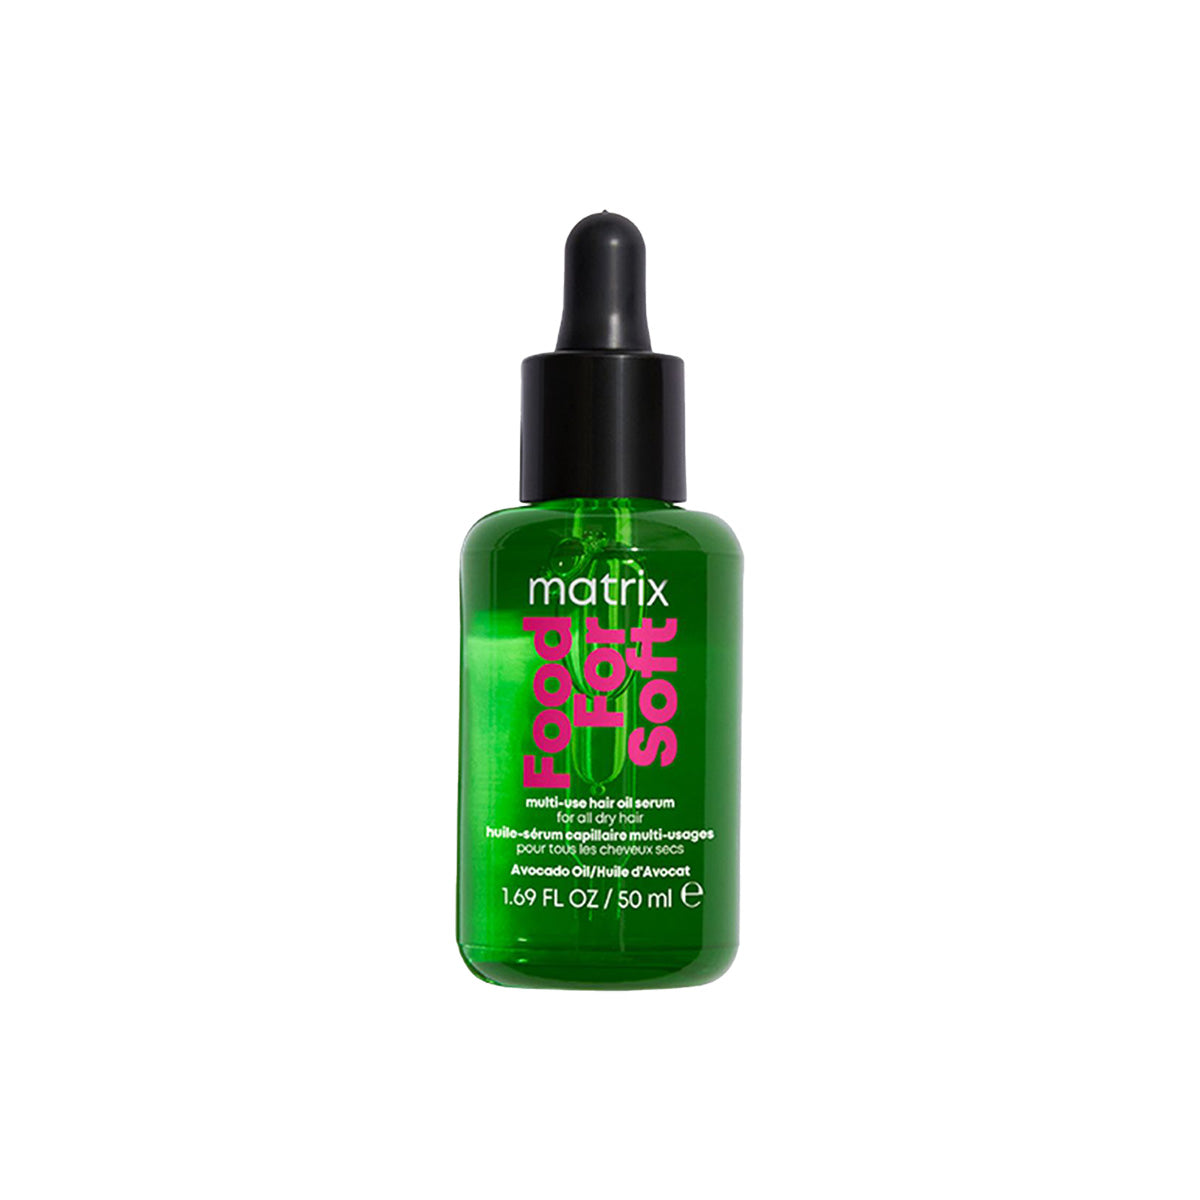 Matrix Total Results Food For Soft Hair Oil Serum 50ml 1